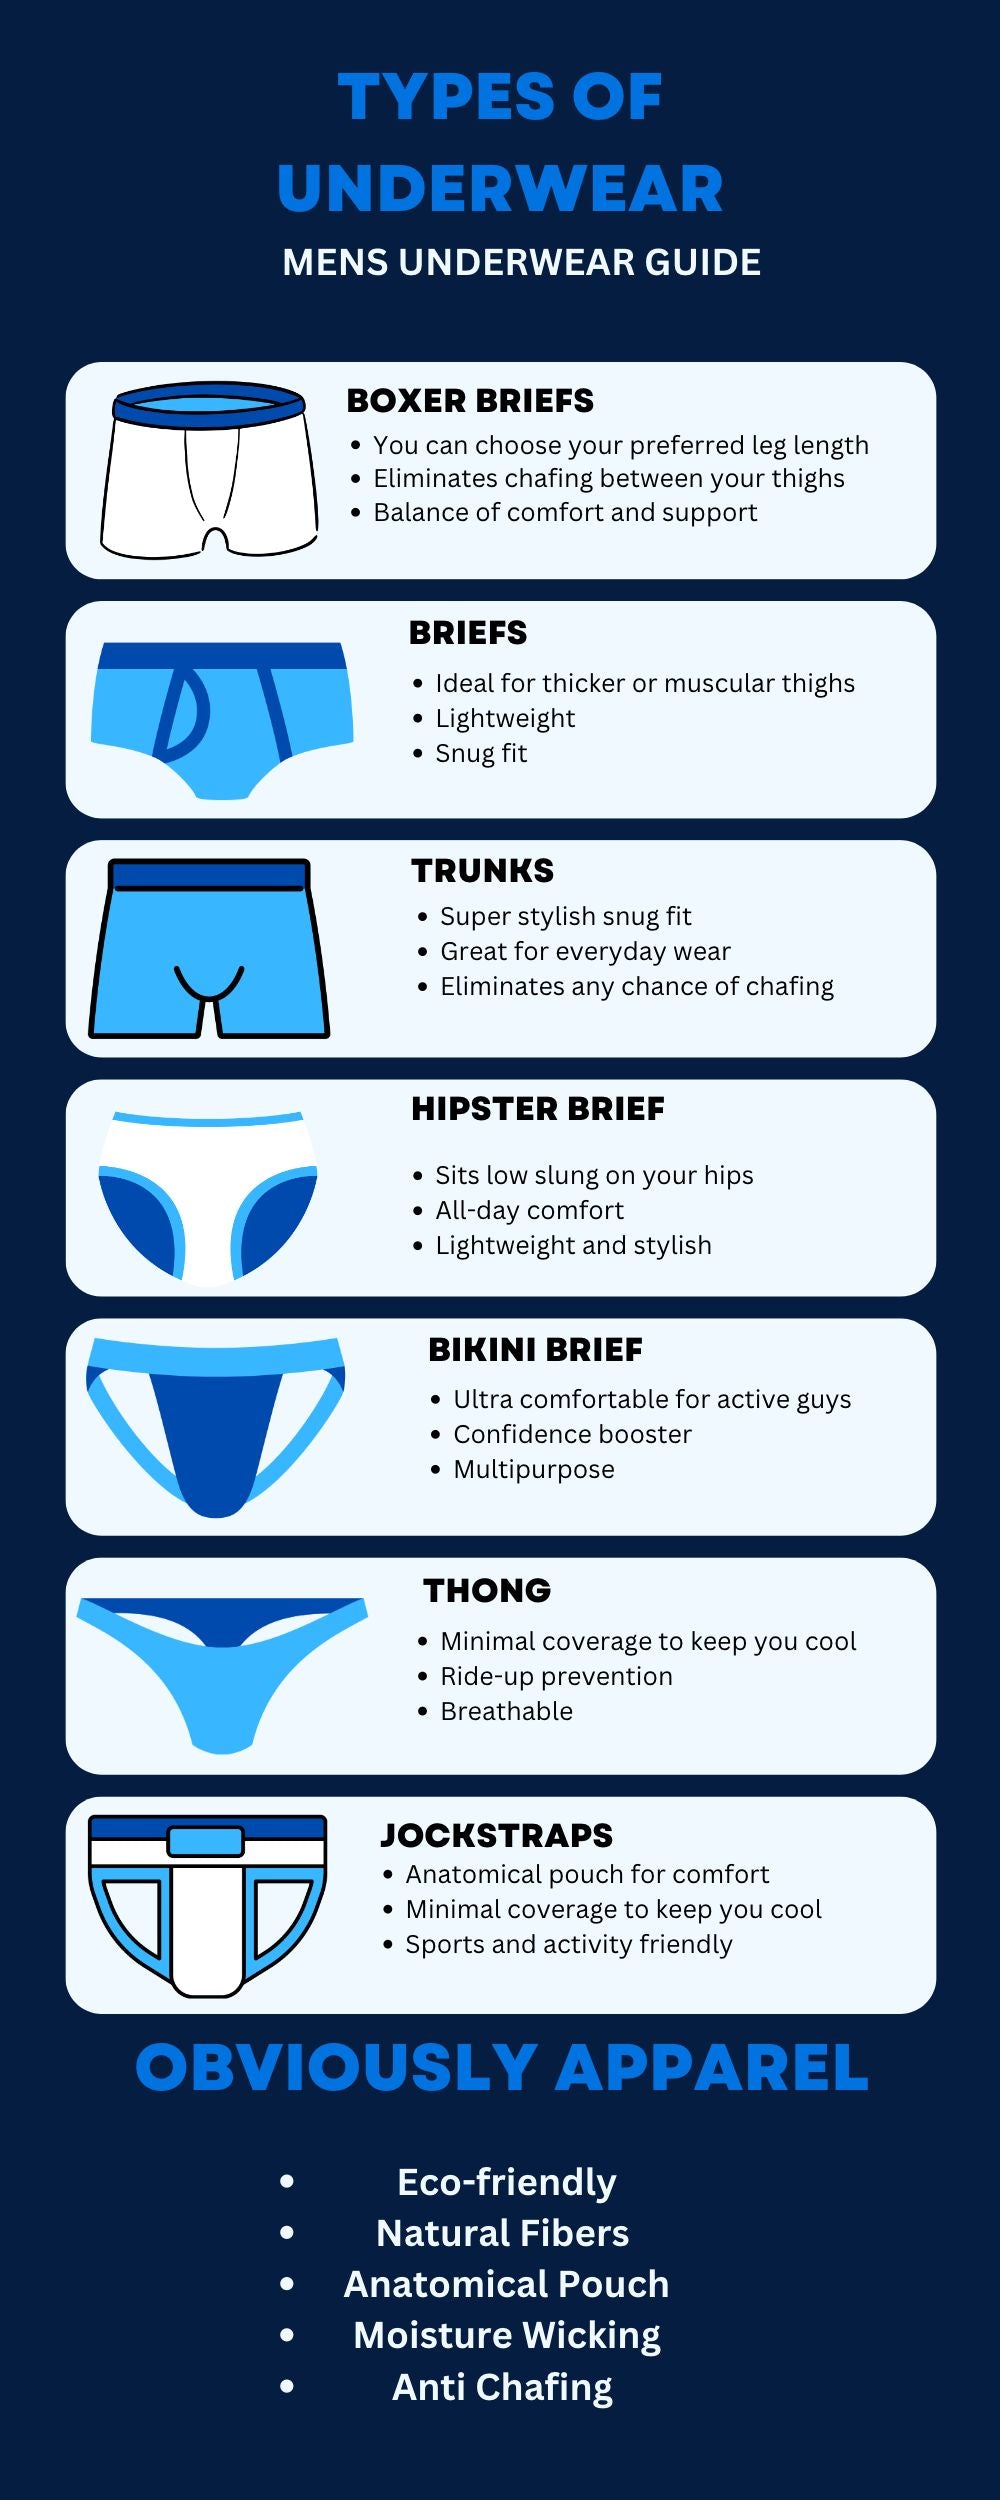 Definition & Meaning of Underclothing